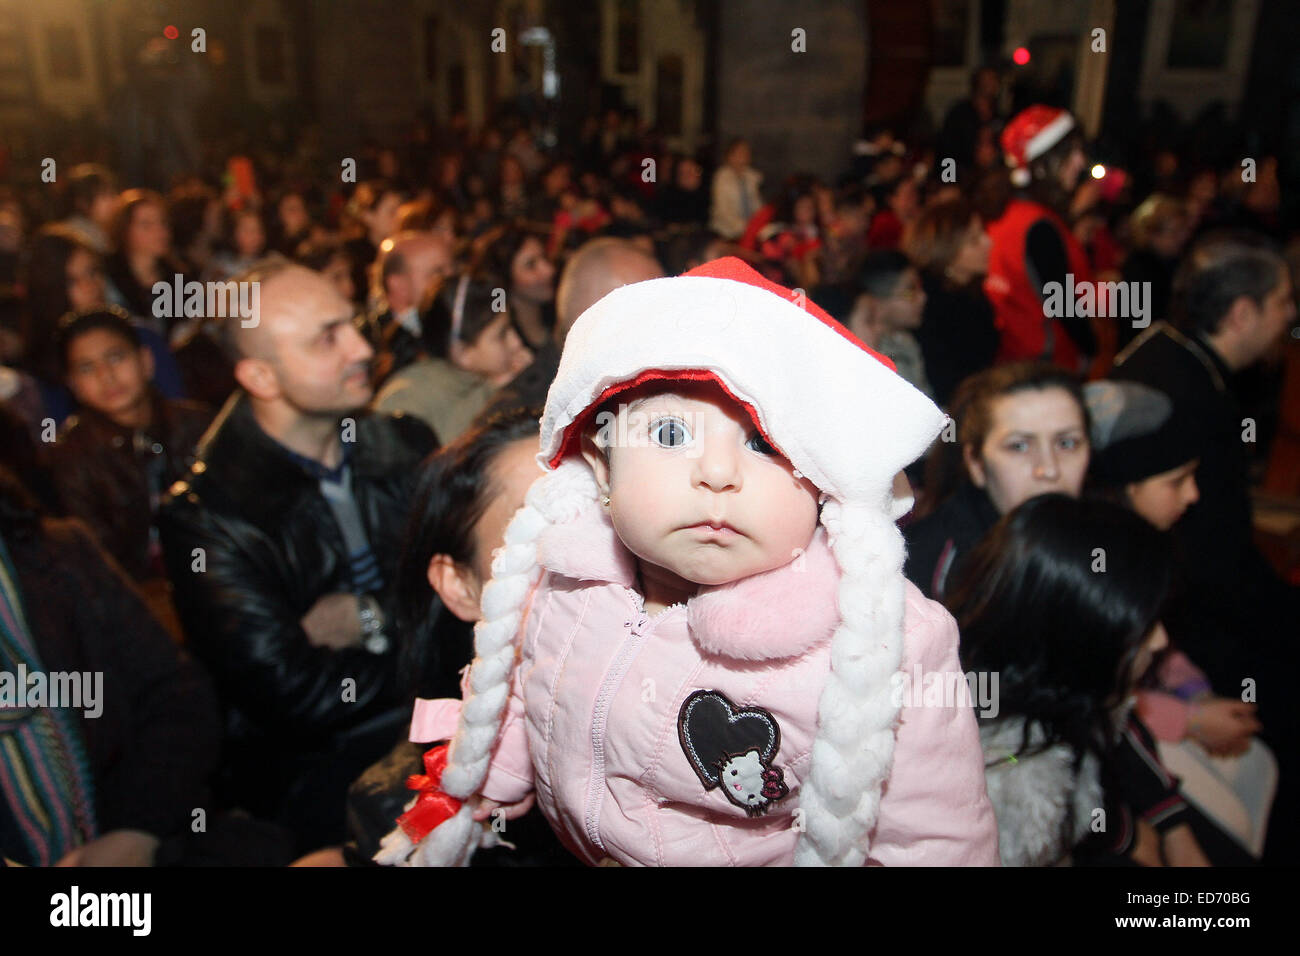 Damascus, Syria. 30th Dec, 2014. A baby attends the Christmas celebration at al-Zaitoun Cathedral in Damascus, capital of Syria, on Dec. 30, 2014. About 1,500 Syrian Christian kids and their parents gathered at al-Zaitoun Cathedral in Syria's capital Damascus to take part in a Christmas celebration. About 10 percent of population in Syria are Christian, who suffered persecution in some parts of the country by the hands of the extremist groups. © Bassem Tellawi/Xinhua/Alamy Live News Stock Photo